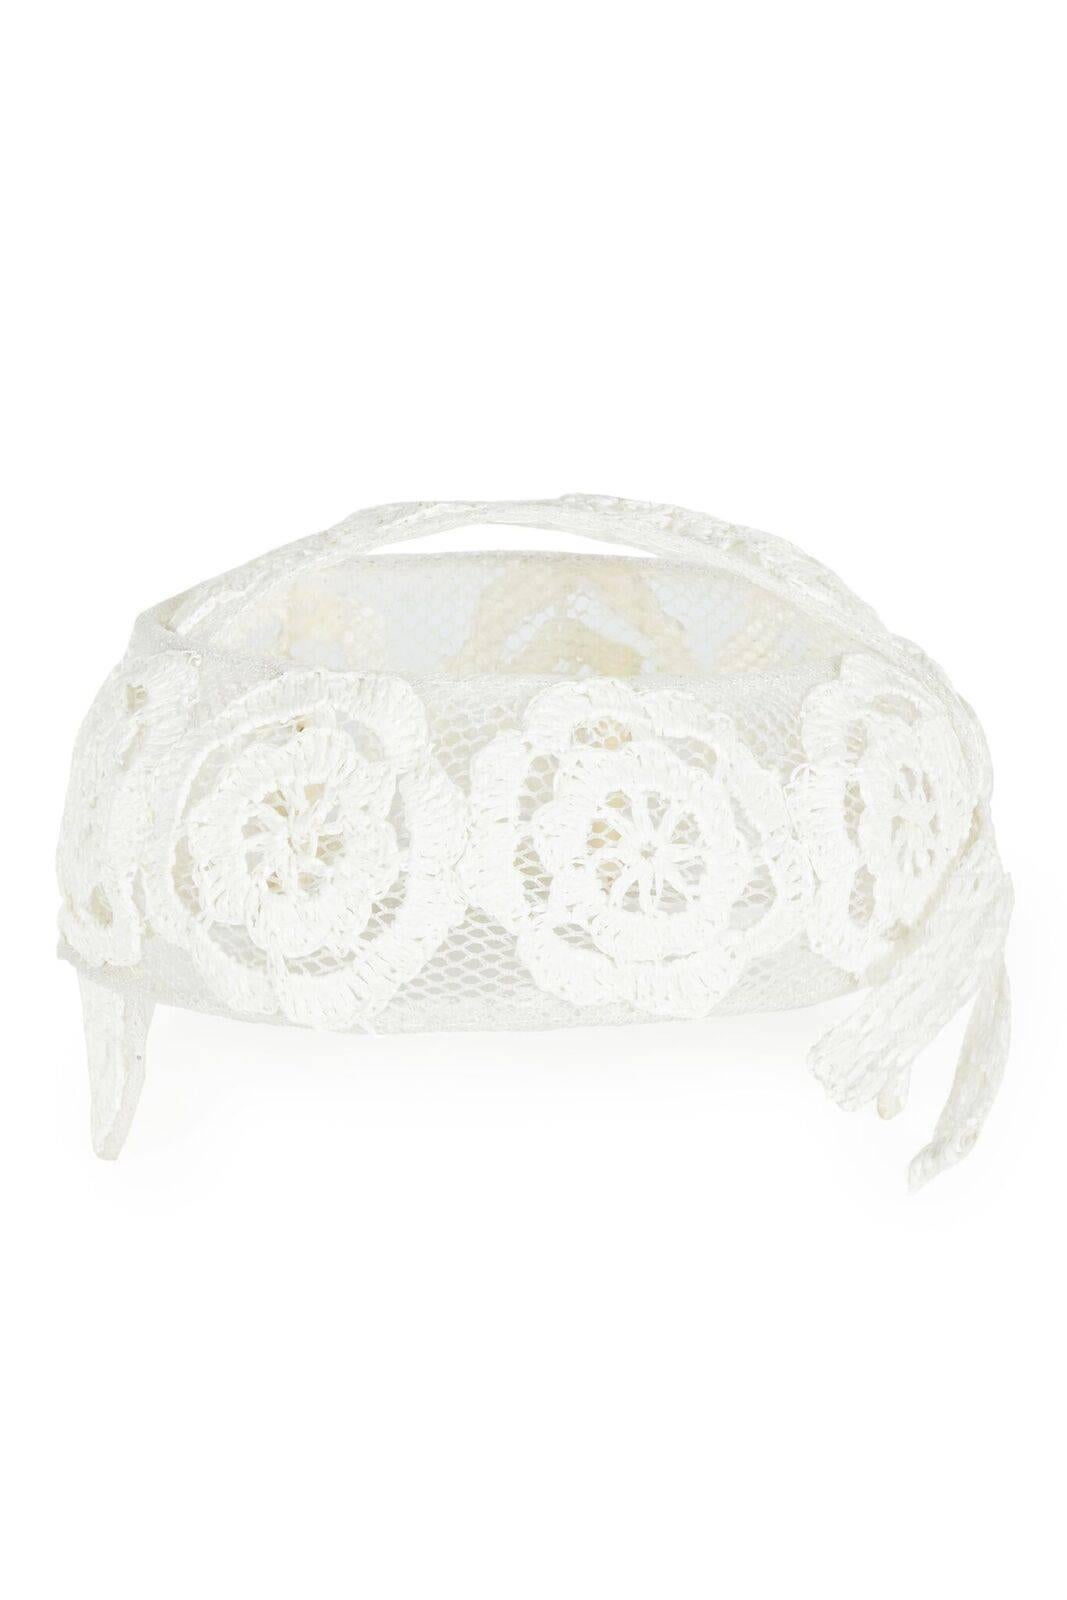 This exquisite vintage 1960s Italian white raffia bridal cap is in beautiful condition, and exceptionally feminine. A pretty tumour rose design is skilfully  woven into the raffia, and appears slightly embossed due to the nature of the material. The